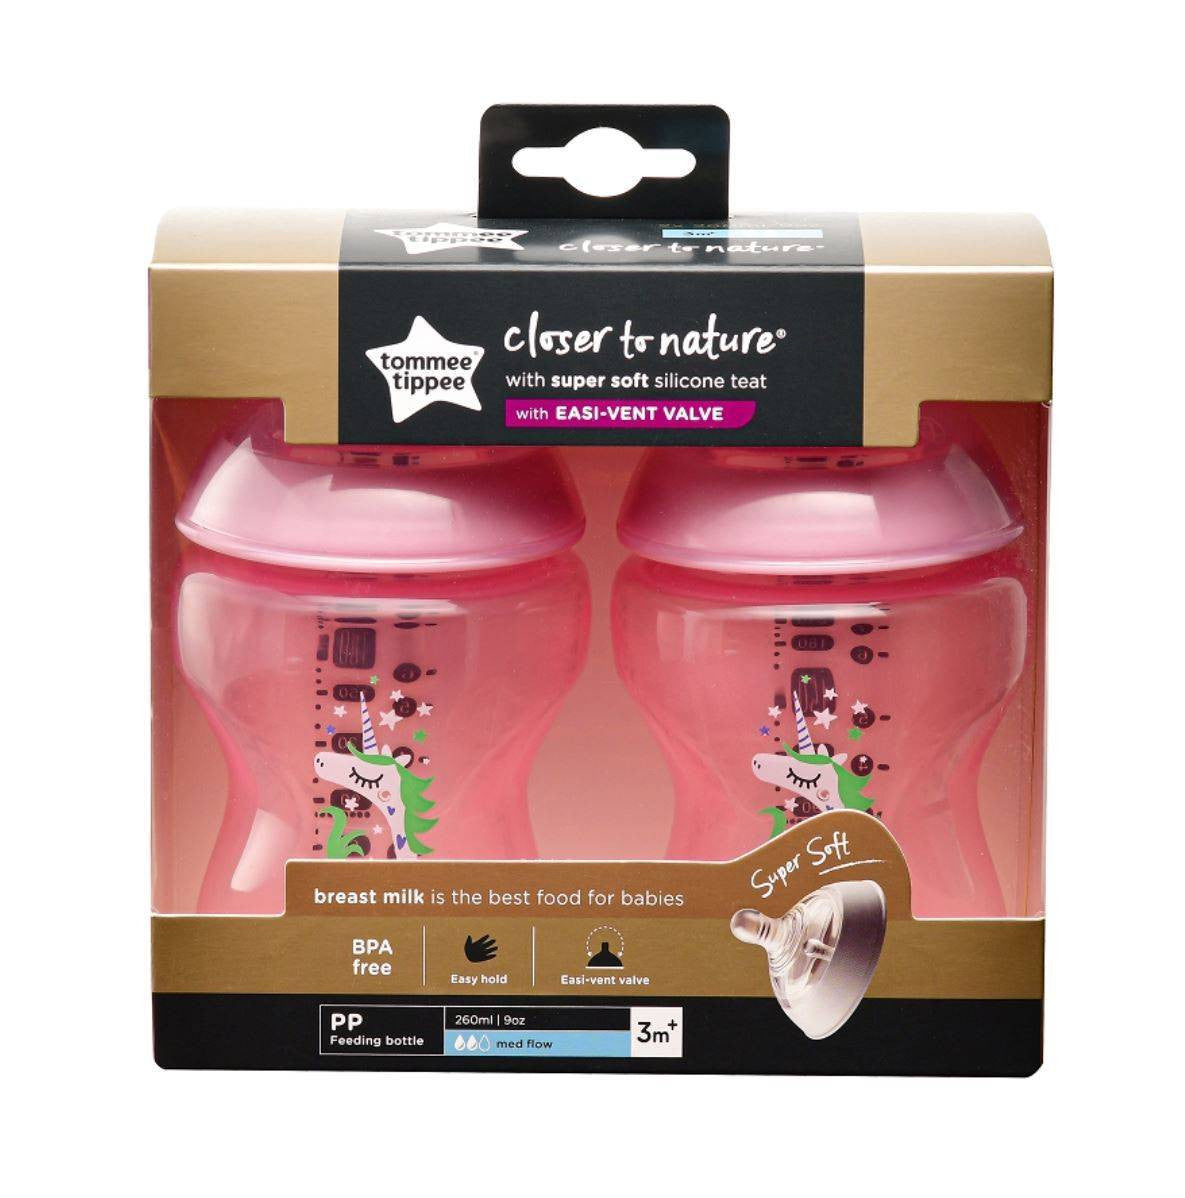 Tommee Tippee Decorated Tinted 9oz / 260ml PP Feeding Bottles (2 Bottles In a Pack) Pink Unicorn Design